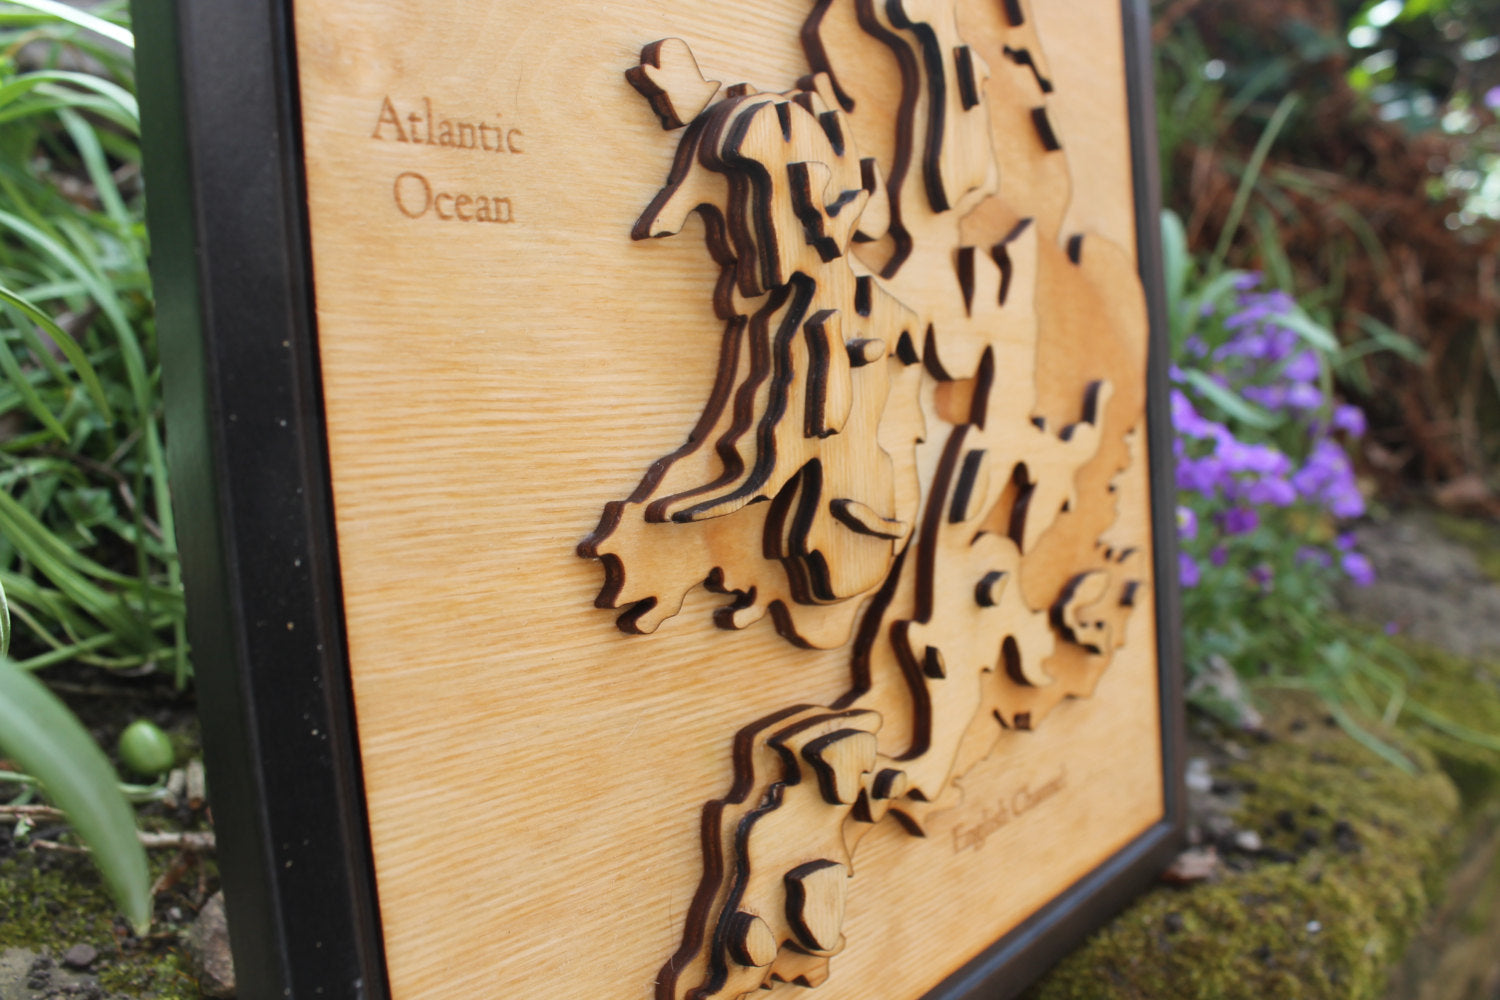 3D England and Wales Map - Wooden Topographical Map - England and Wales Map - Wooden map - Wall hanging